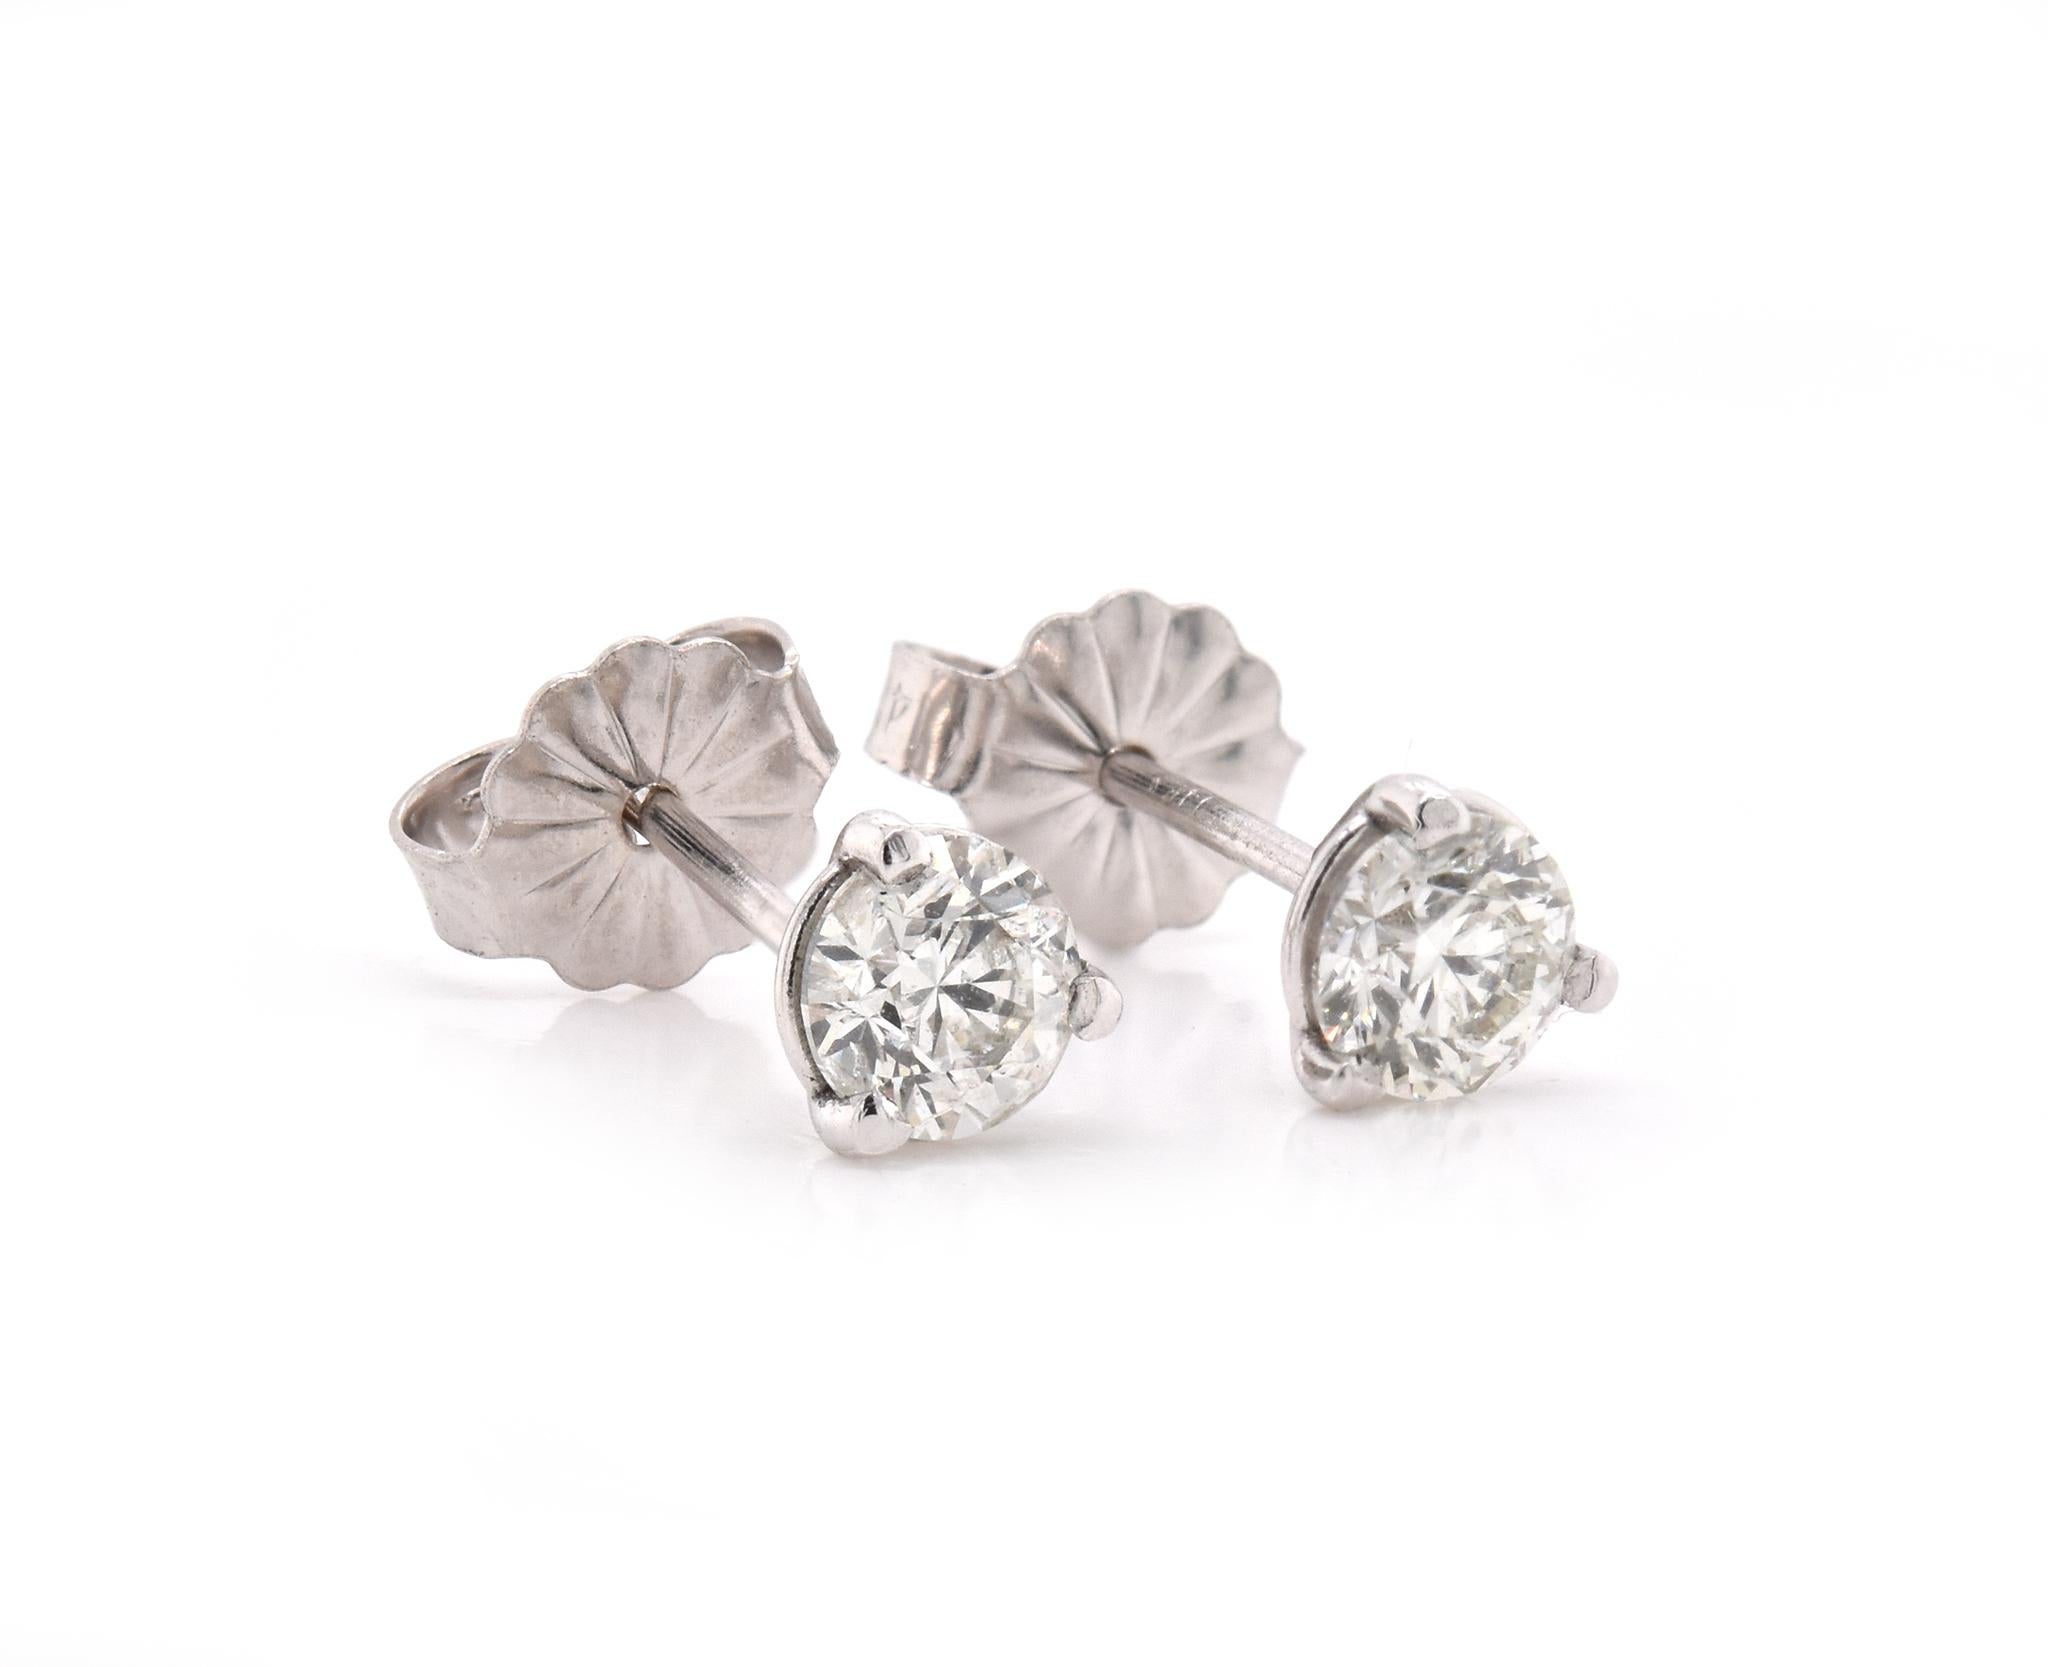 Material: 14k white gold
Diamond: 1 round brilliant cut = .30ct
Color: H
Clarity: SI1
Diamond: 1 round brilliant cut = .30ct
Color: H
Clarity: SI1
Dimensions: earrings measure approximately 4.5mm in diameter
Fastenings: post with friction